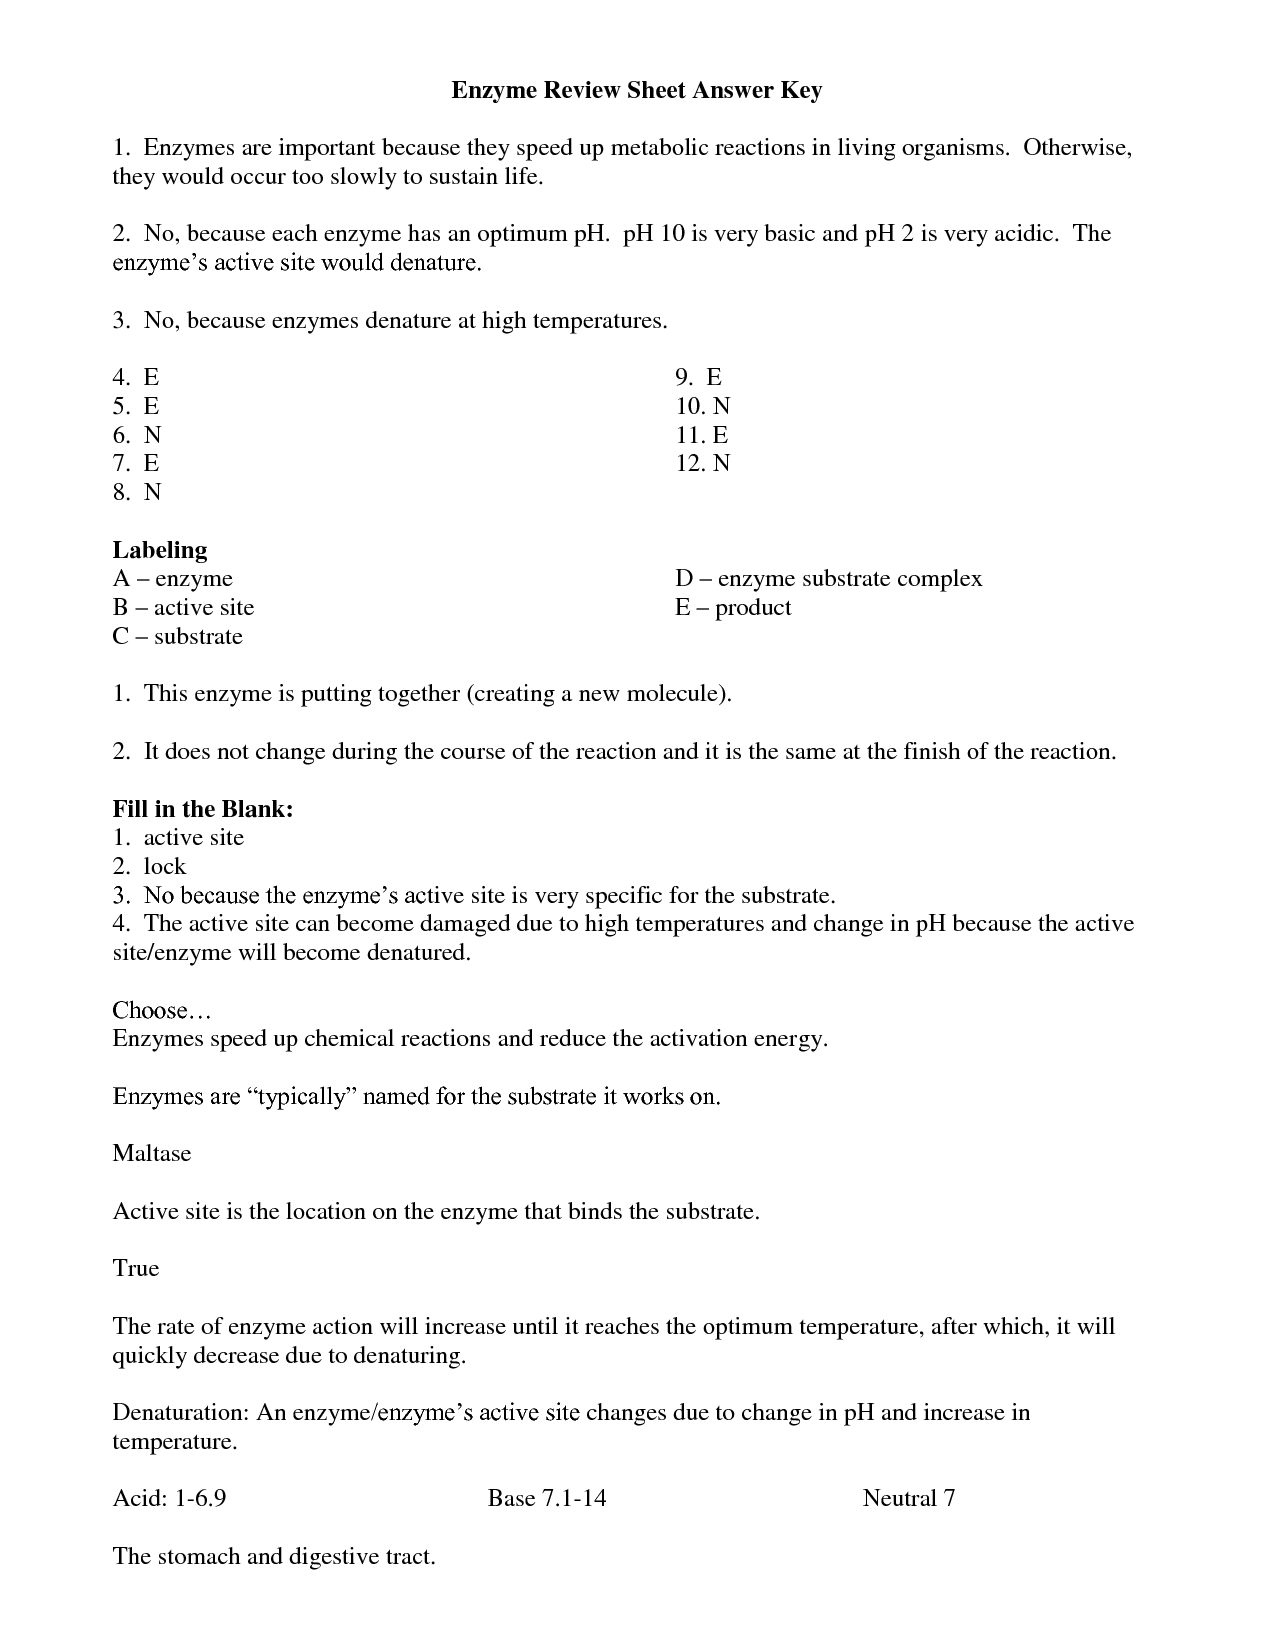 13-best-images-of-enzyme-practice-worksheet-answers-virtual-lab